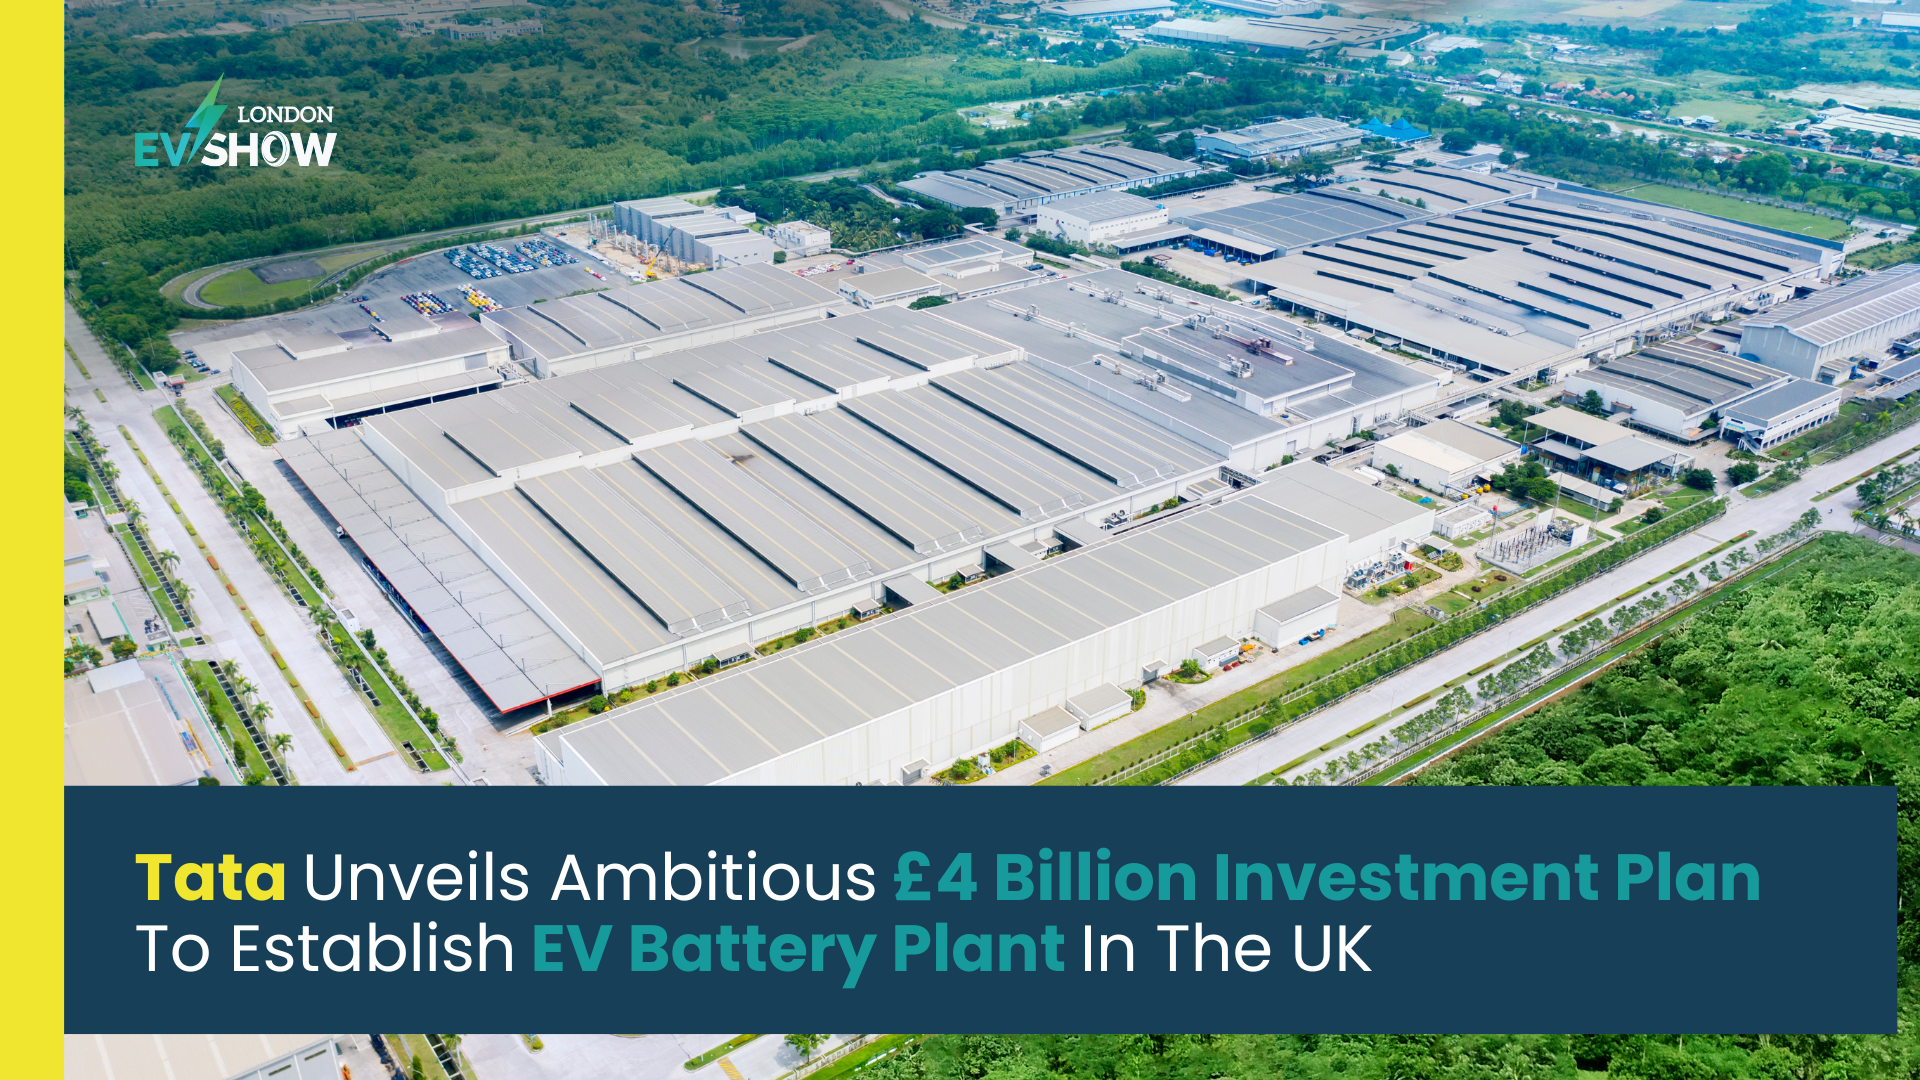 Tata Unveils Ambitious £4 Billion Investment Plan To Establish EV Battery Plant In The UK